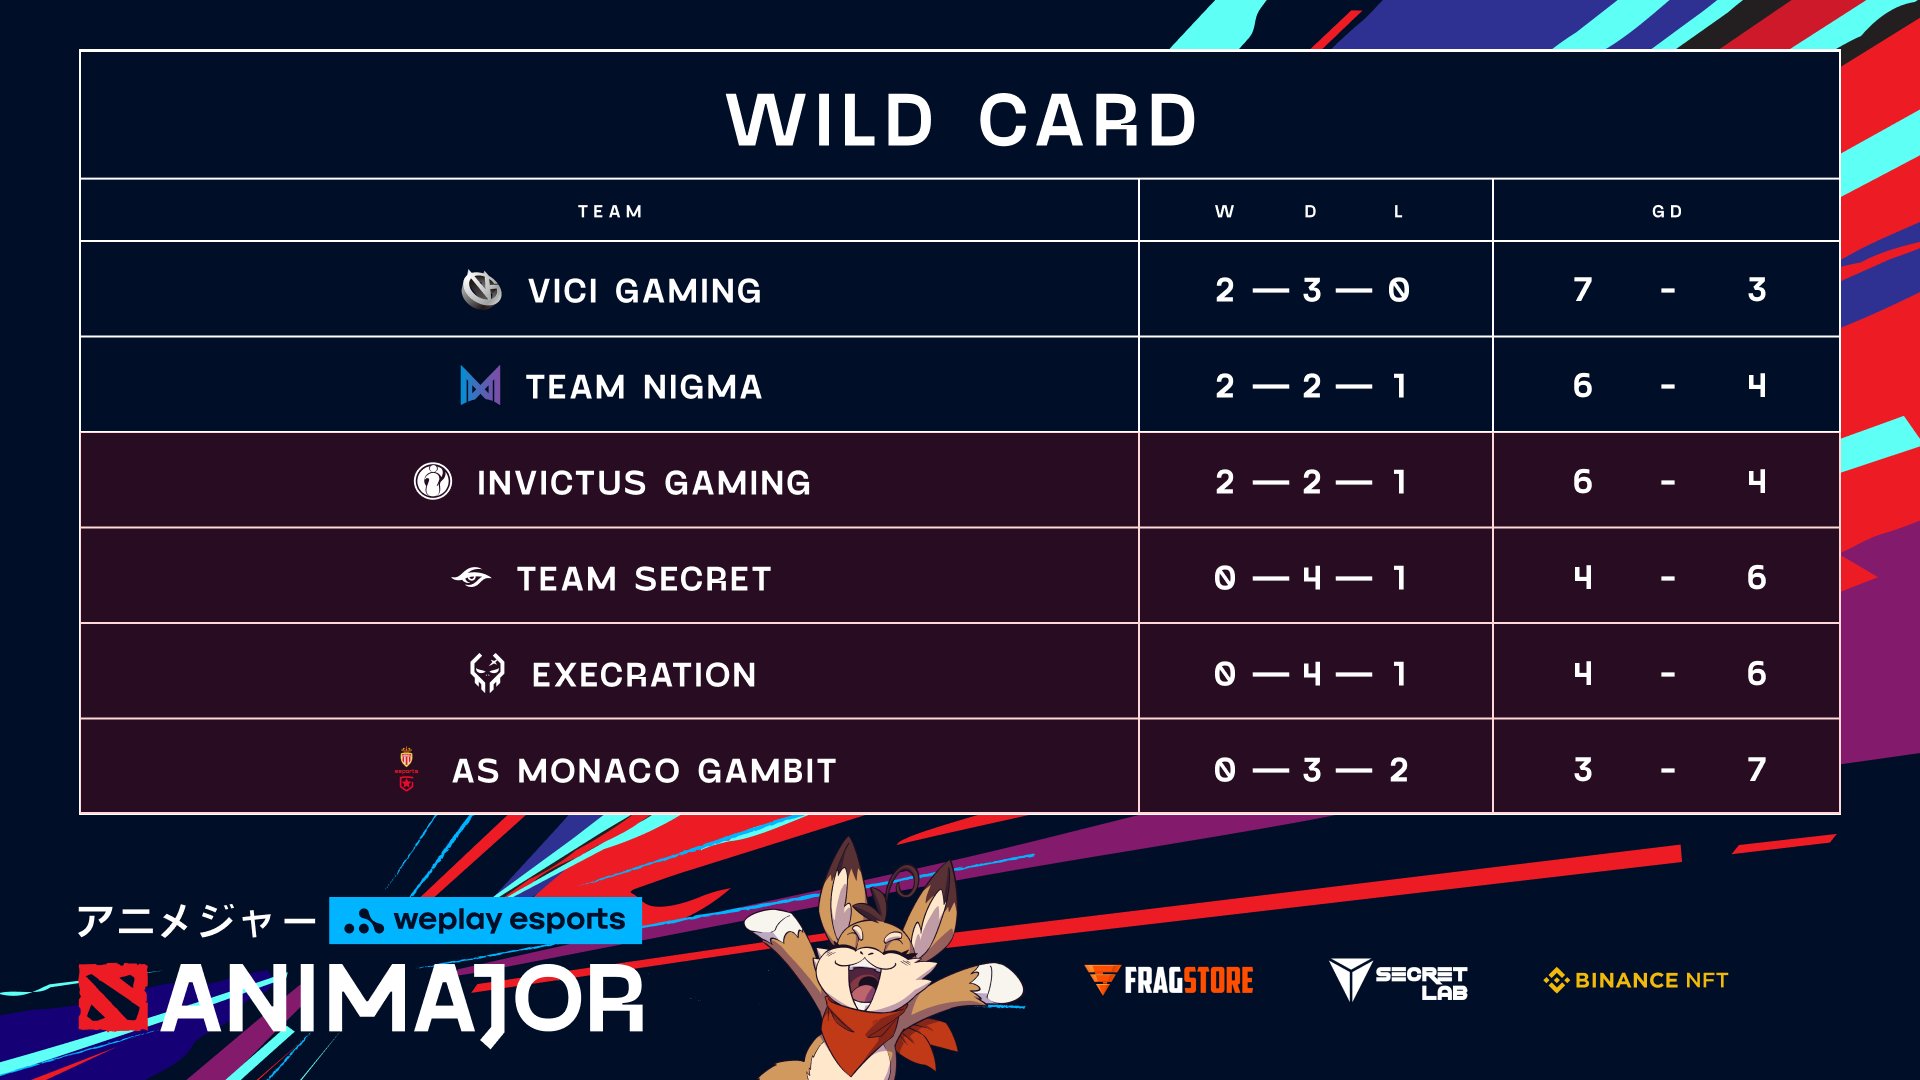 Team Nigma and Vici Gaming Passed the Wild Card Round